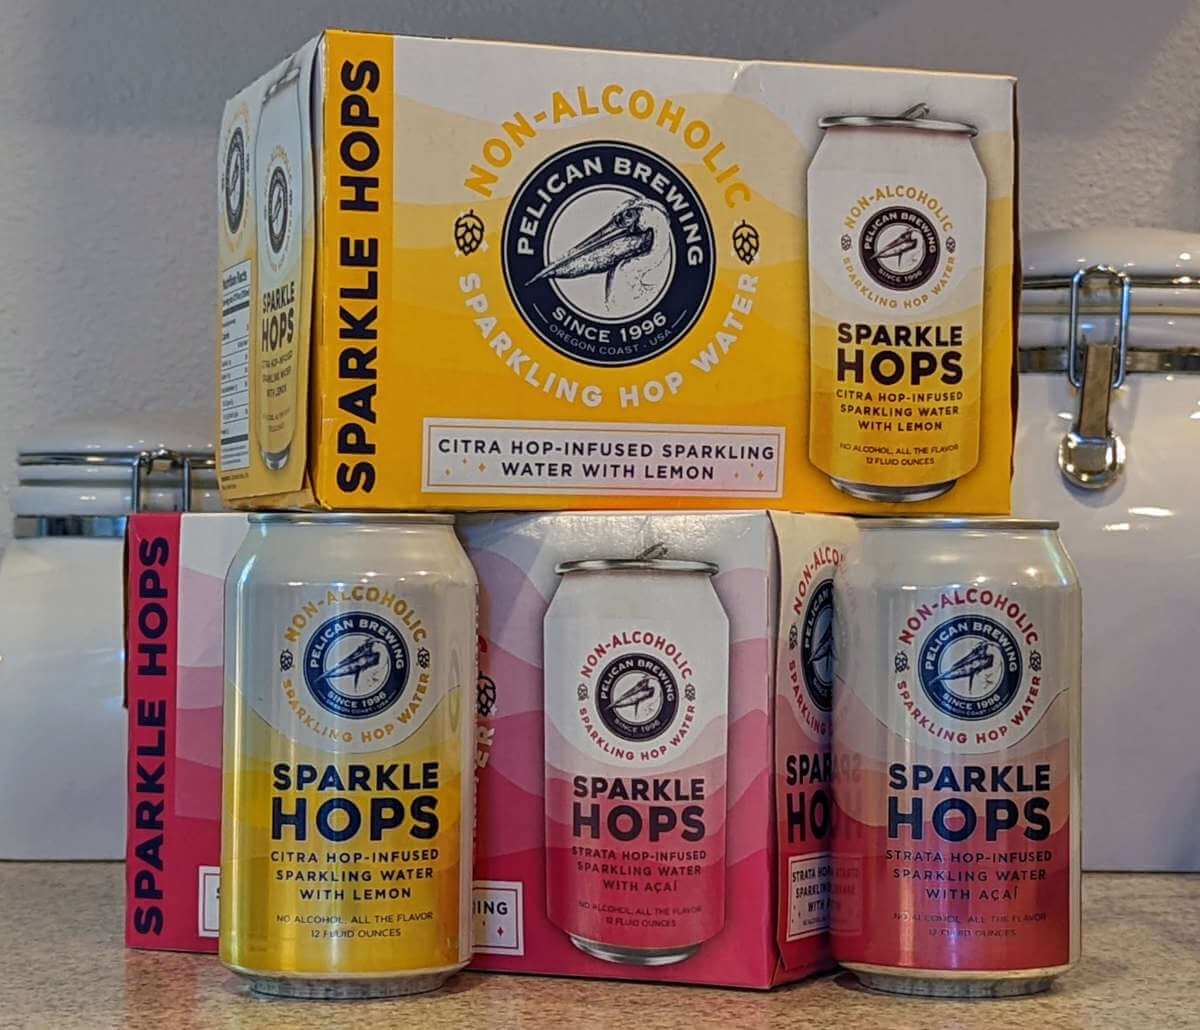 Review: Sparkle Hops hop-infused sparkling water from Pelican Brewing